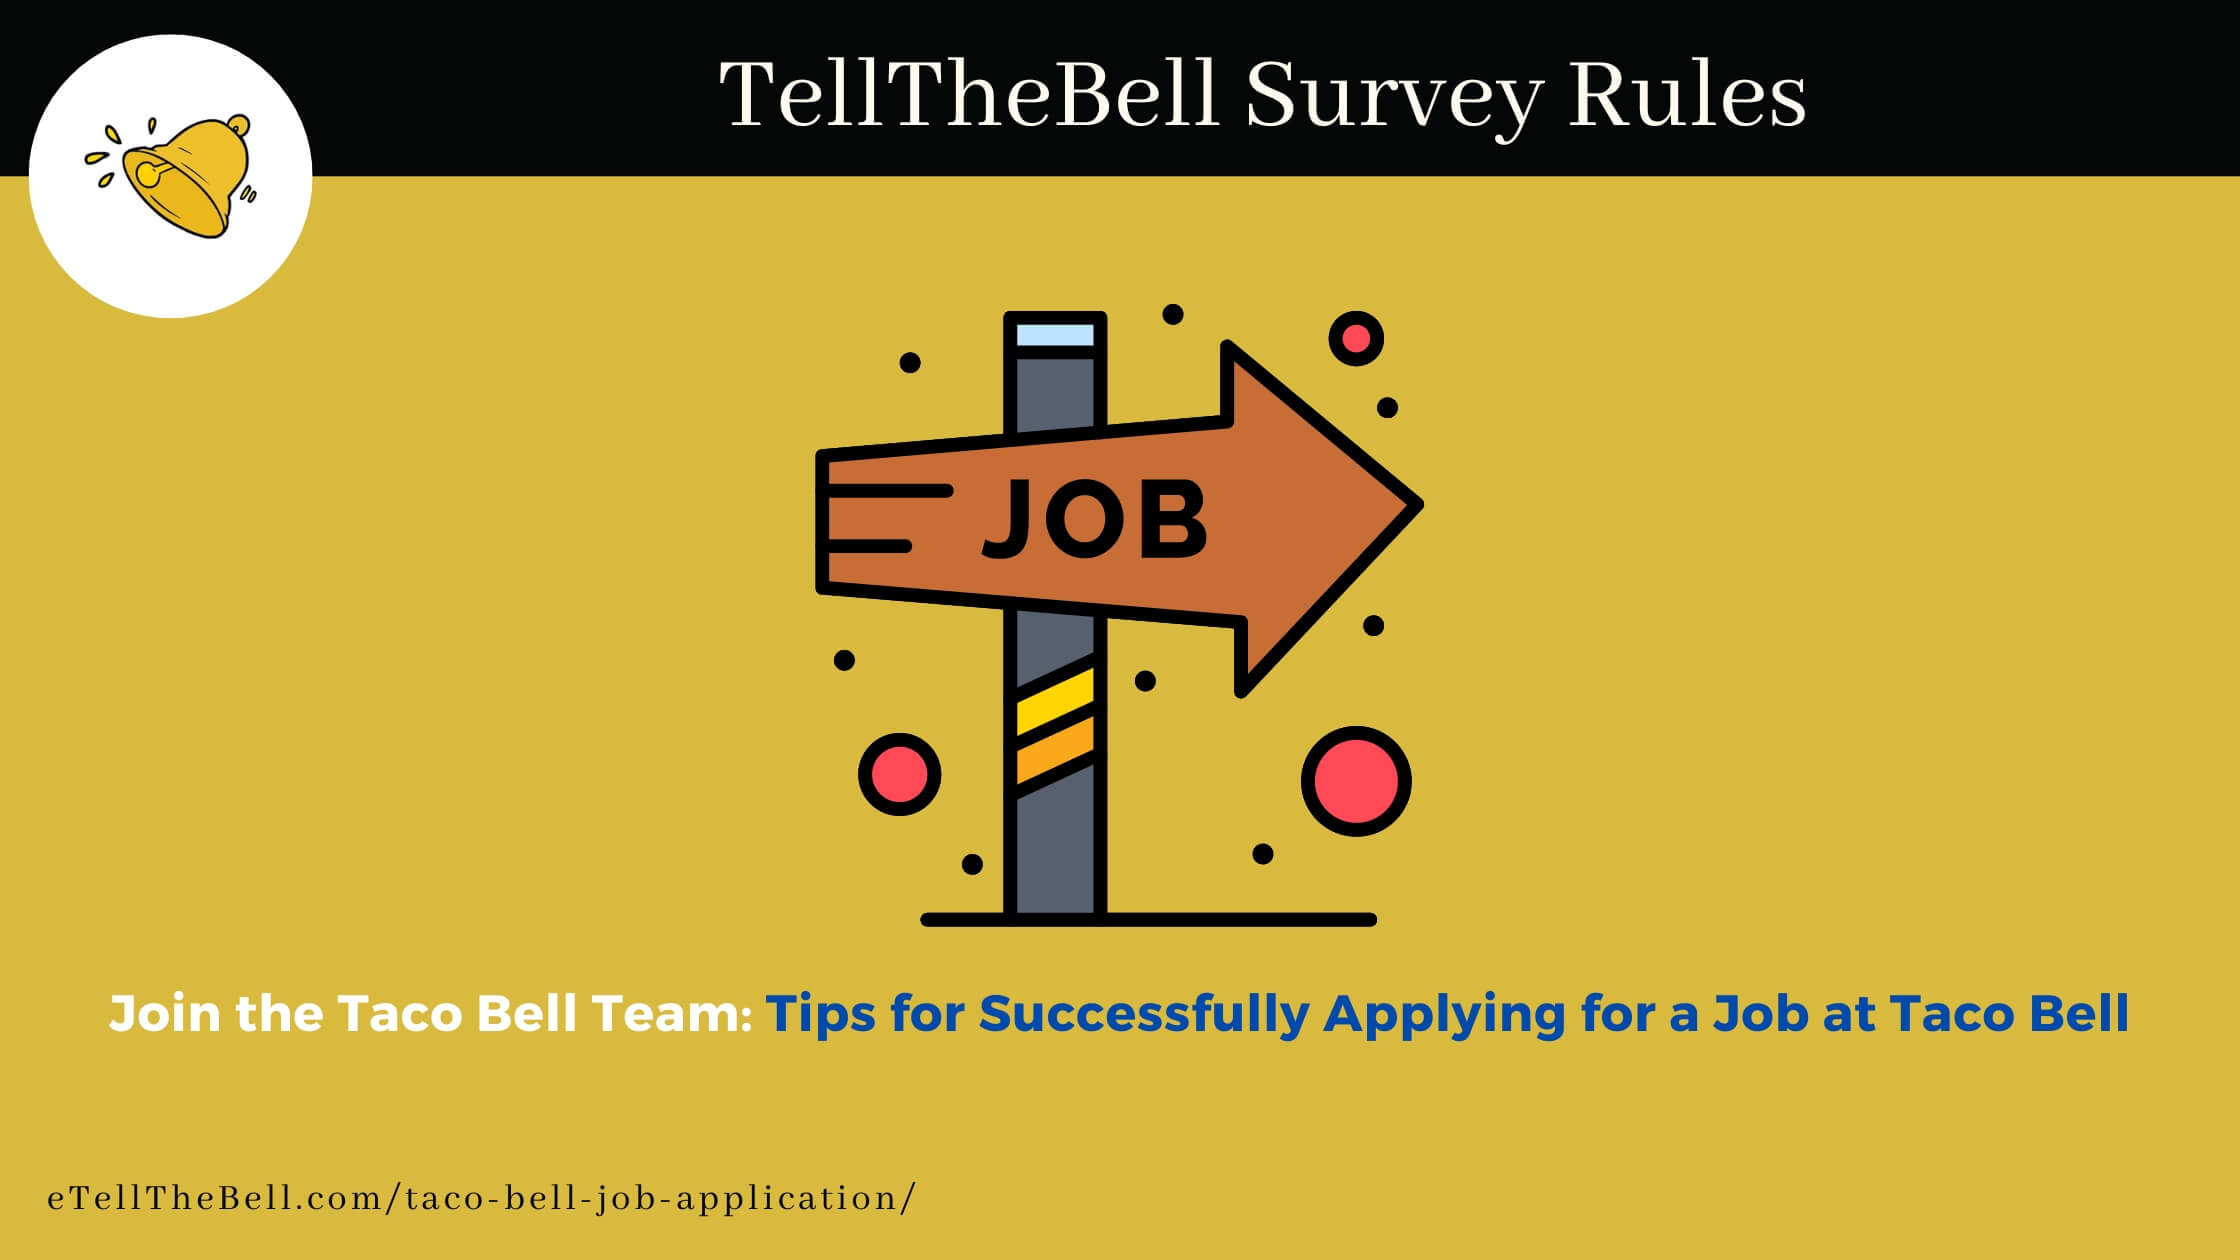 Join the Taco Bell Team_ Tips for Successfully Applying for a Job at Taco Bell